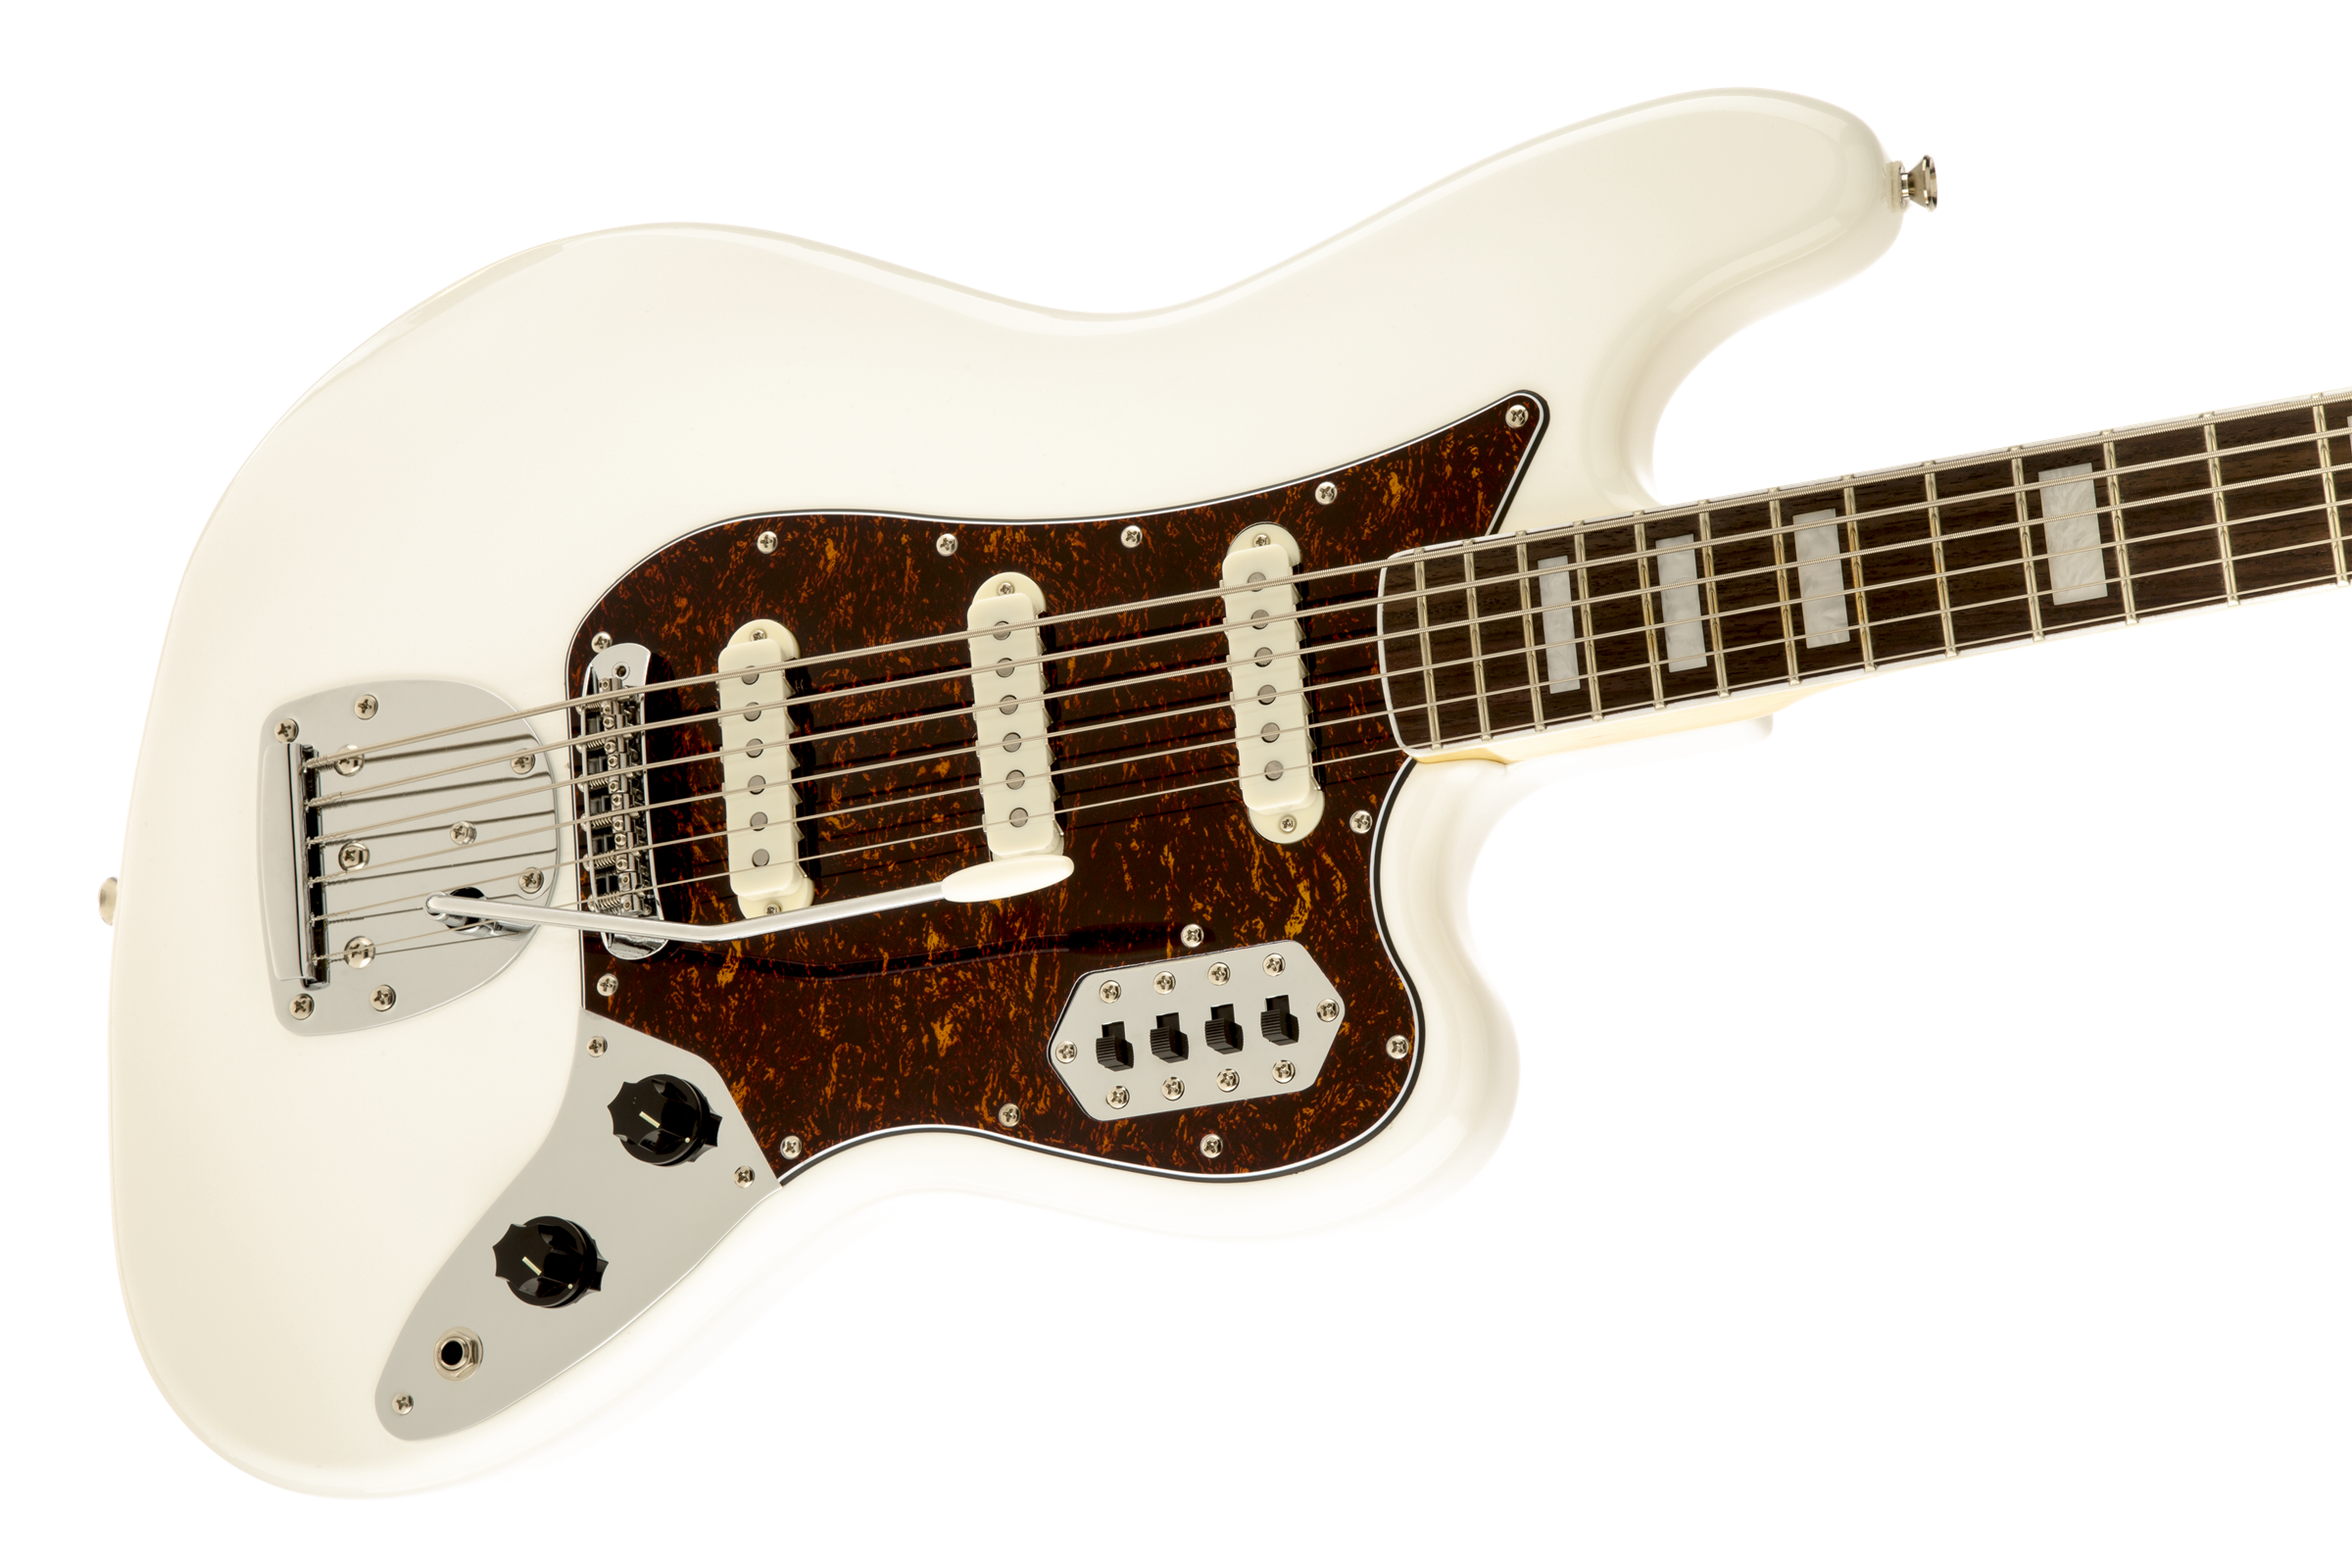 Squier Bass Vi Vintage Modified (rw) - Olympic White - Basse Électrique Solid Body - Variation 2